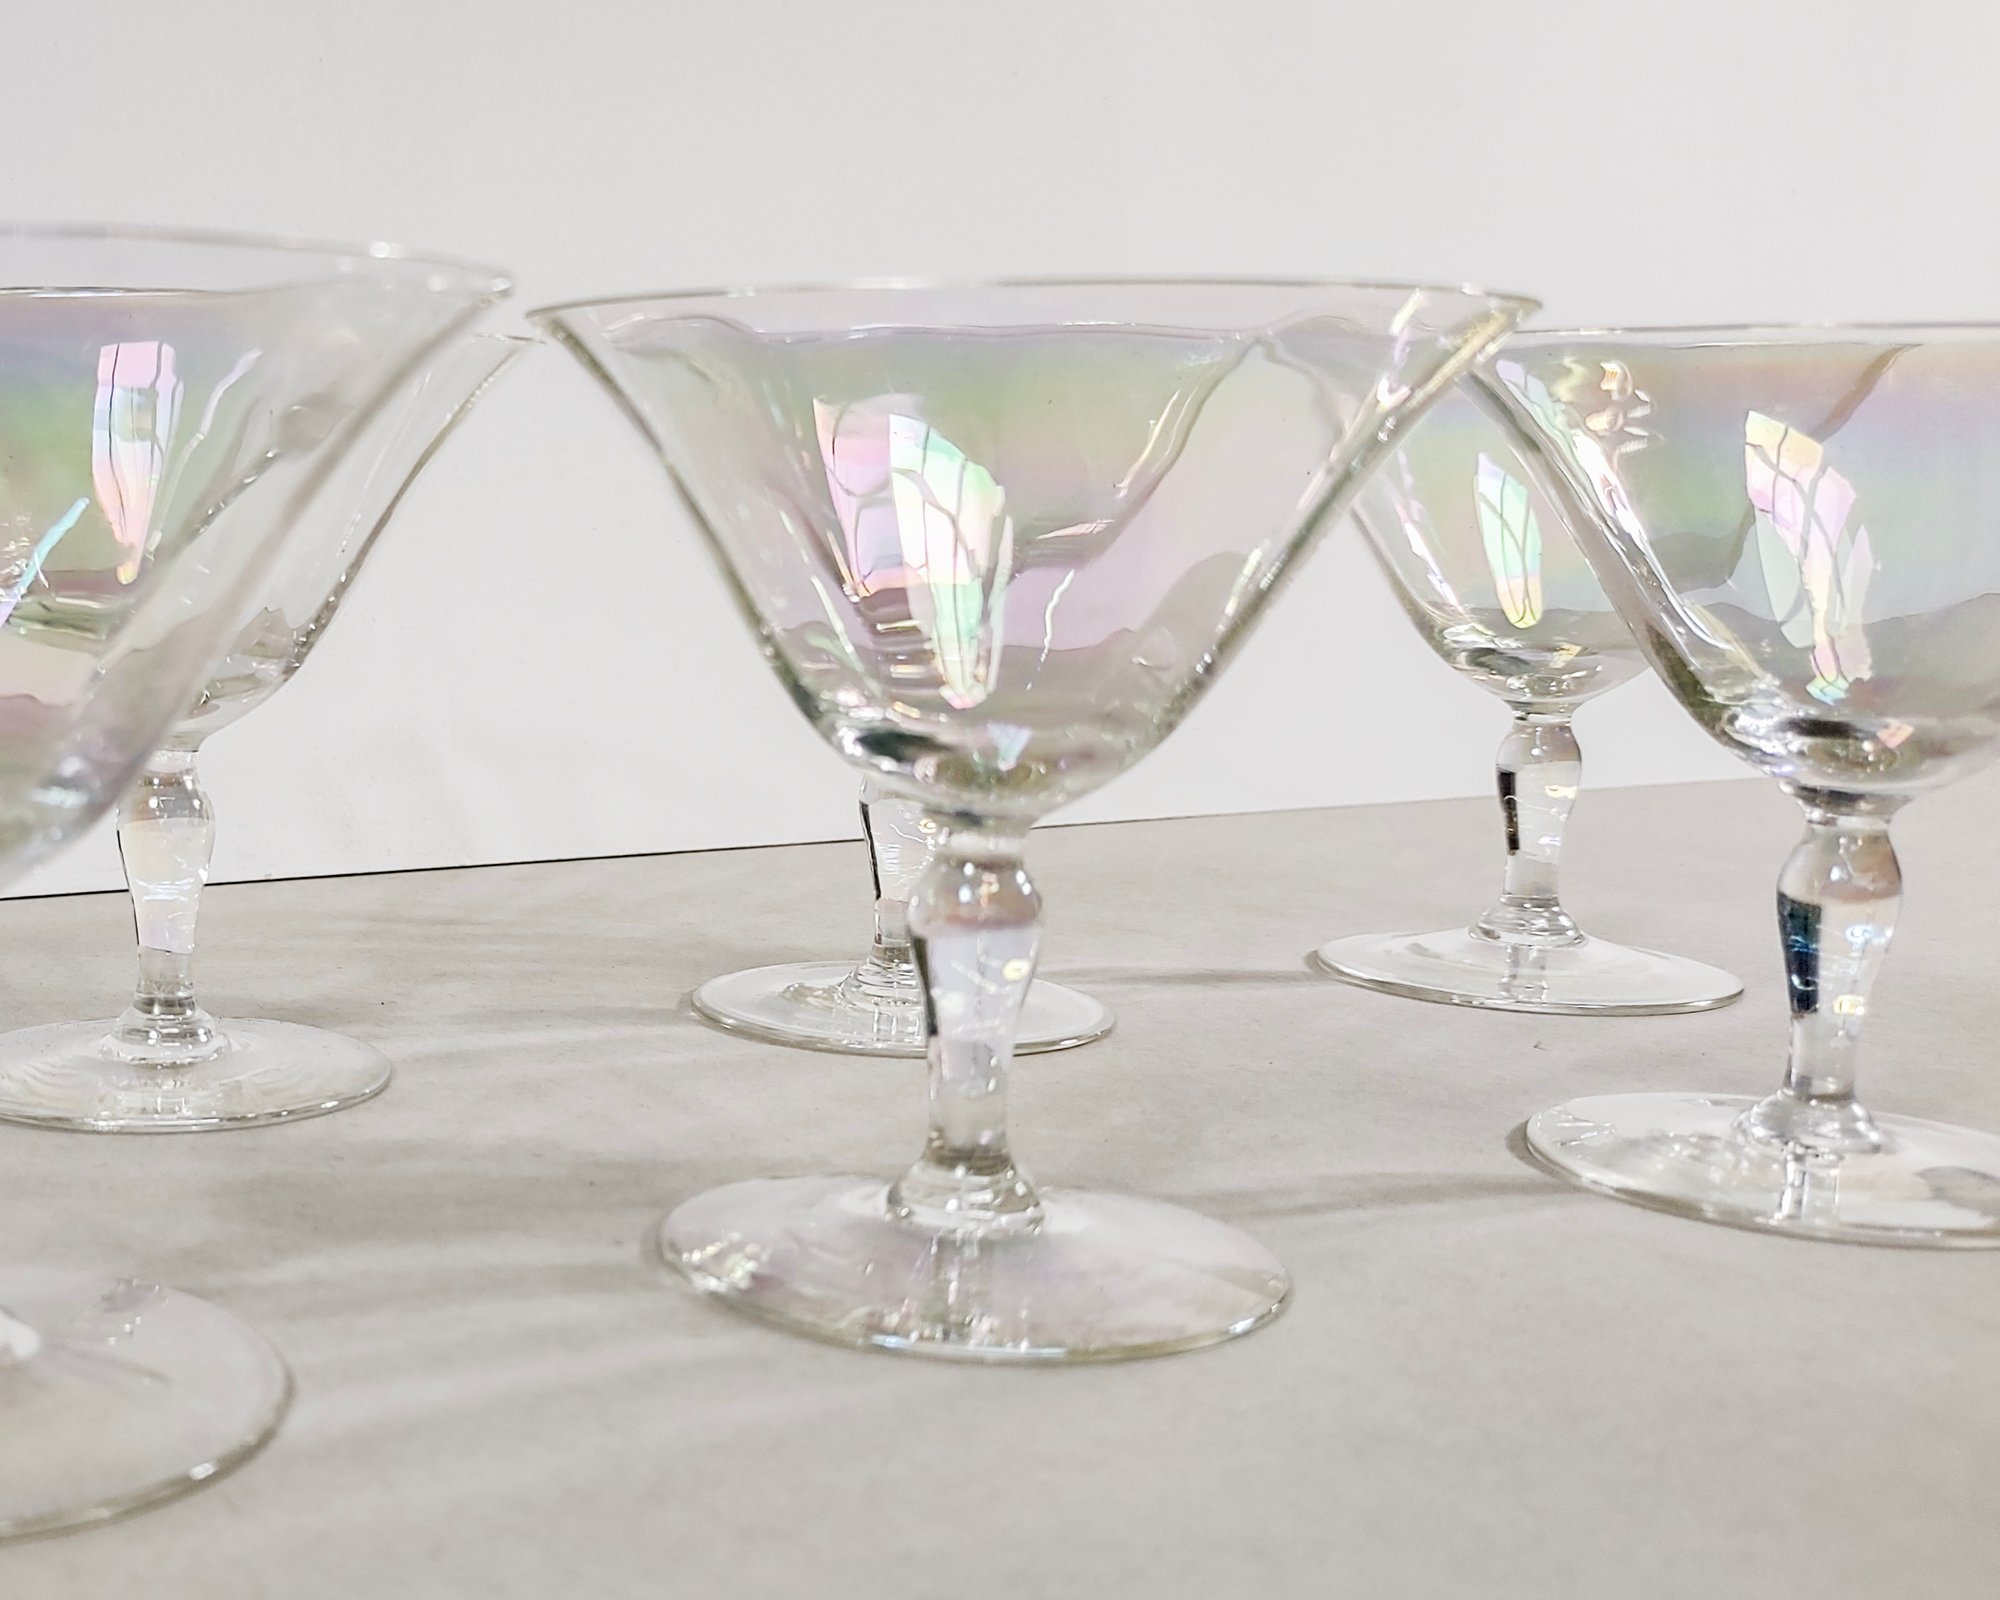 Catalina Footed Champagne Glass Iridescent Set/2